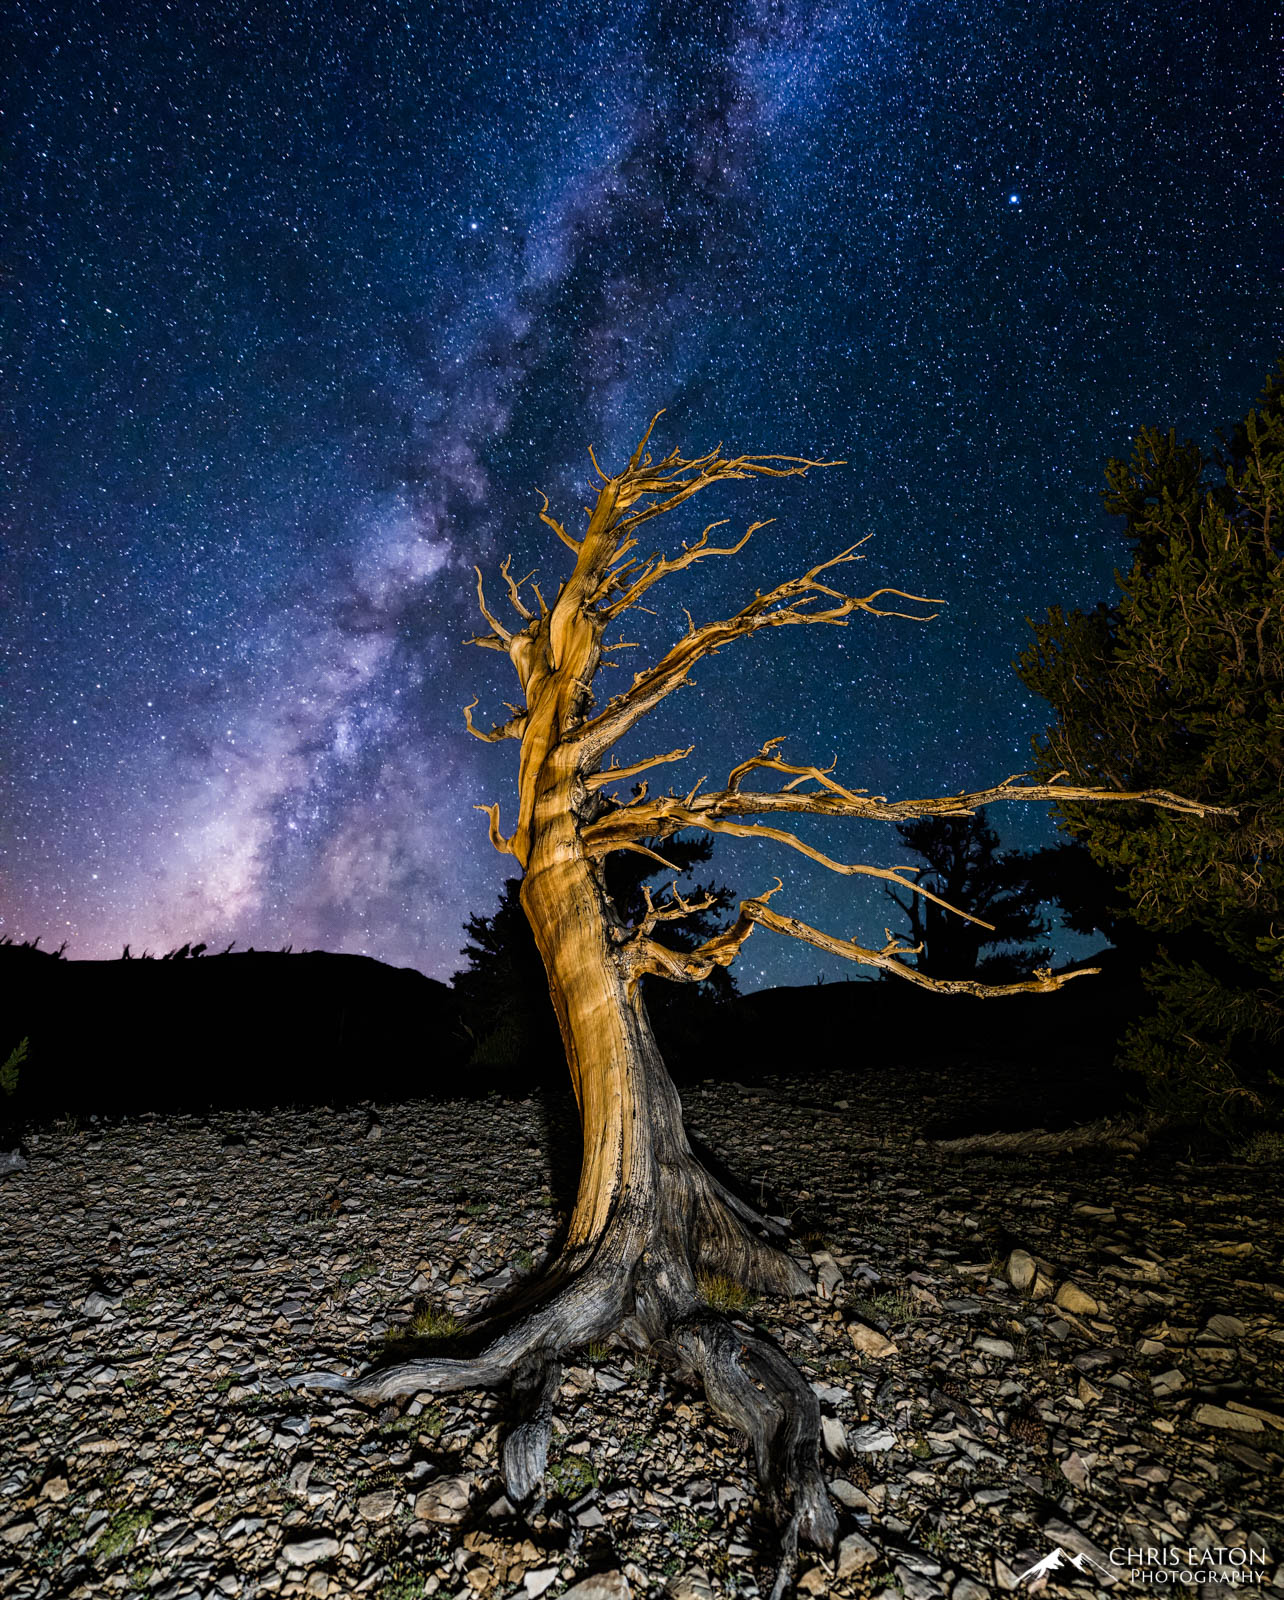 The Milky Way above a dead Bristlecone Pine tree in the White Mountains of the Eastern Sierras.